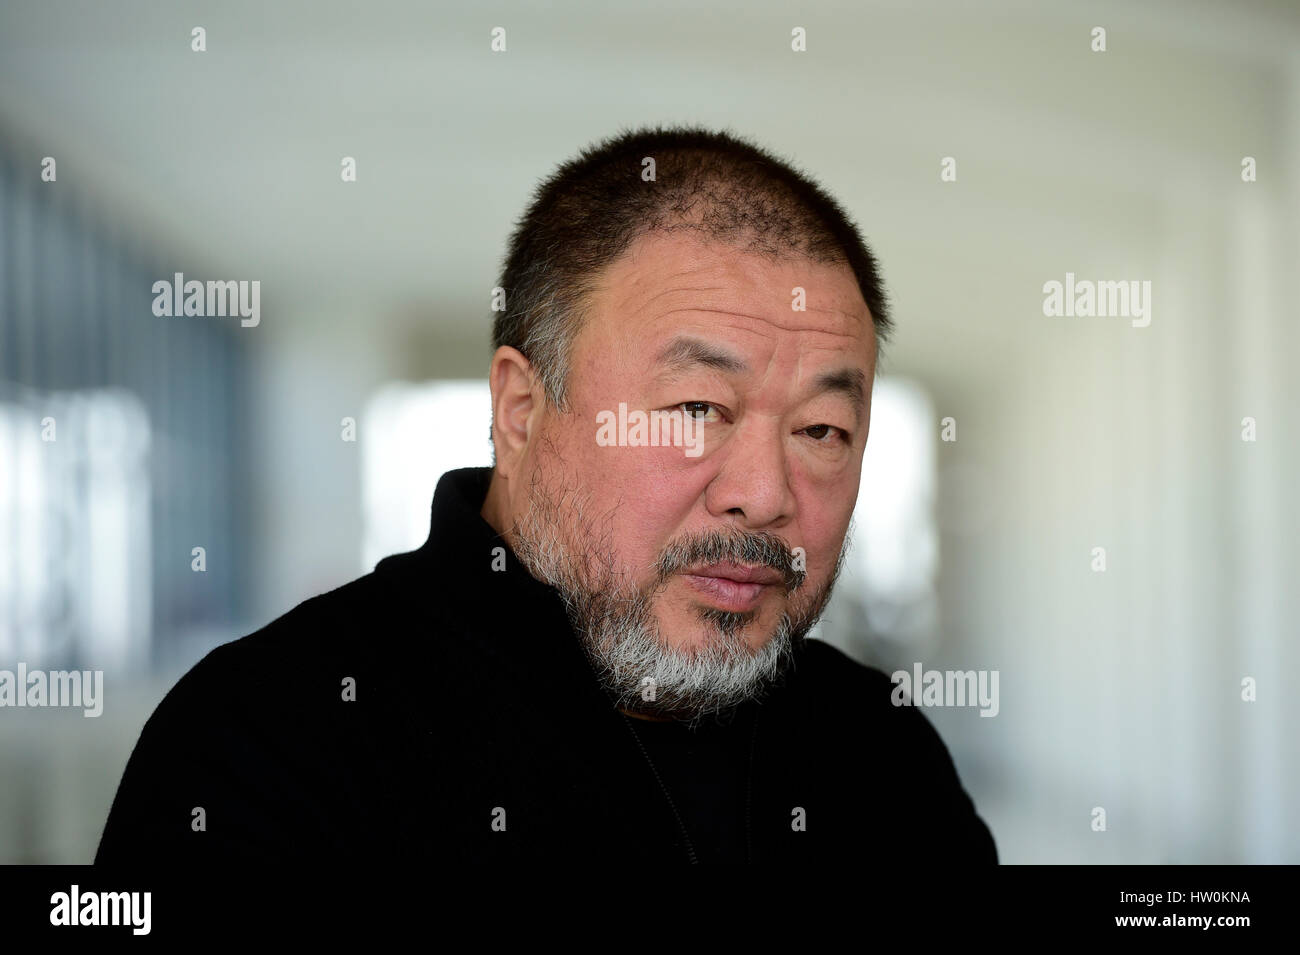 Prague, Czech Republic. 16th Mar, 2017. The latest work by Chinese conceptual artist Ai Weiwei, 59, pictured, which will be presented to the public at the National Gallery (NG) in Prague, Czech Republic, March 16, 2017, shows refugees perceived by the Western world as an inhuman mass without their own identity, names and life stories. Credit: CTK/Alamy Live News Stock Photo